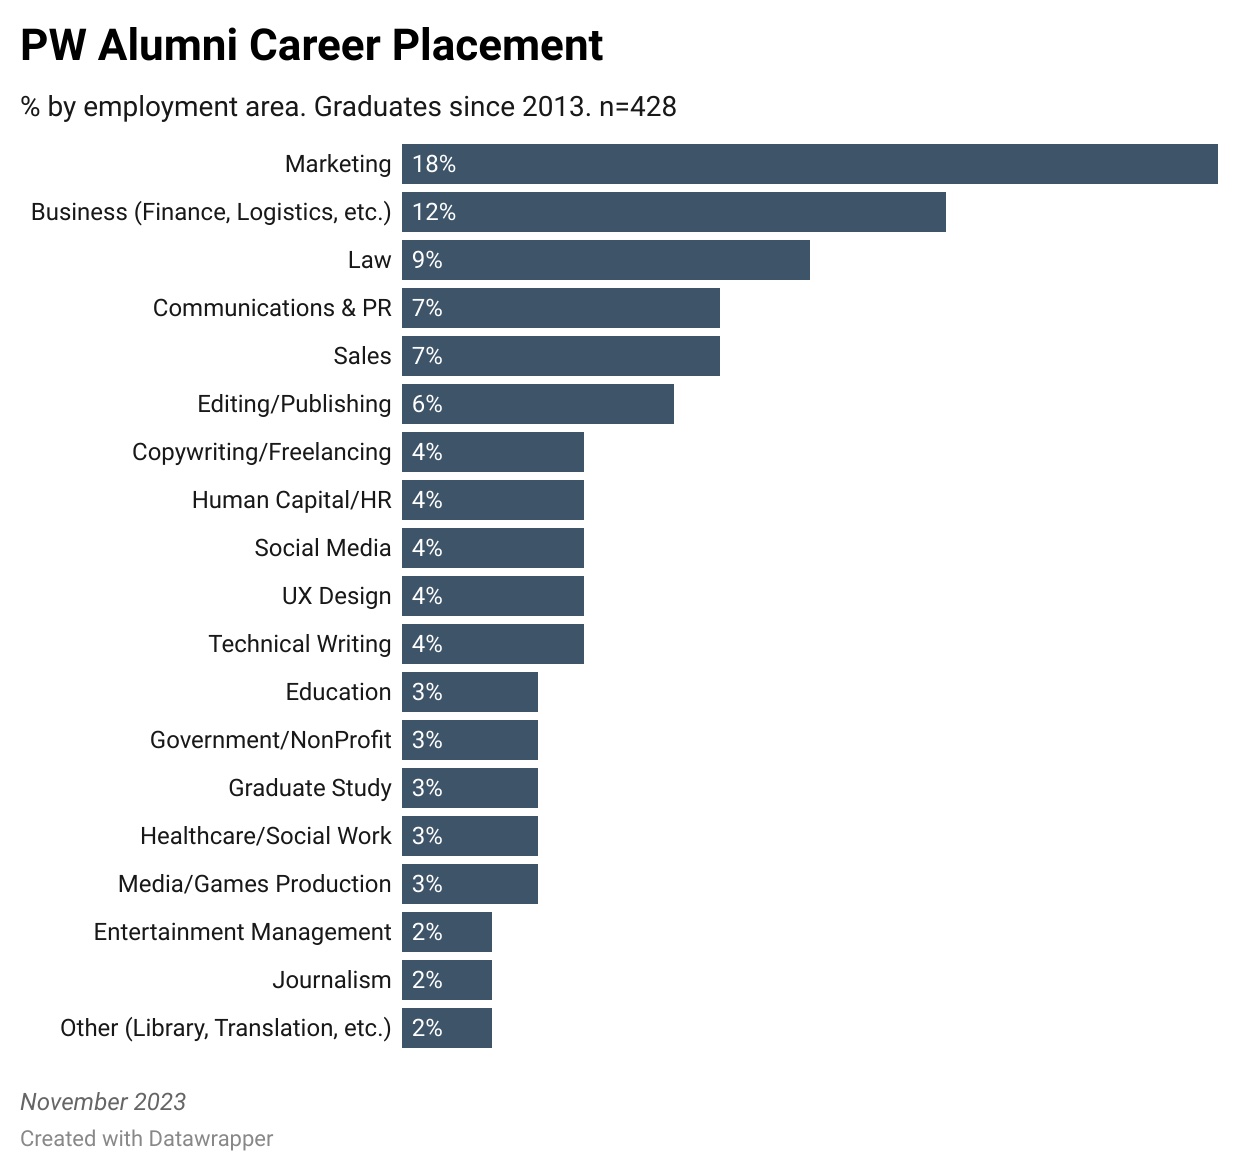 Bar graph titled PW Alumni Career Placement showing areas of employment for 428 recent graduates of the program. Marketing is first (18% of respondents), Business (12%), Law (9%), and Communications and PR (7%) are also common employment areas.